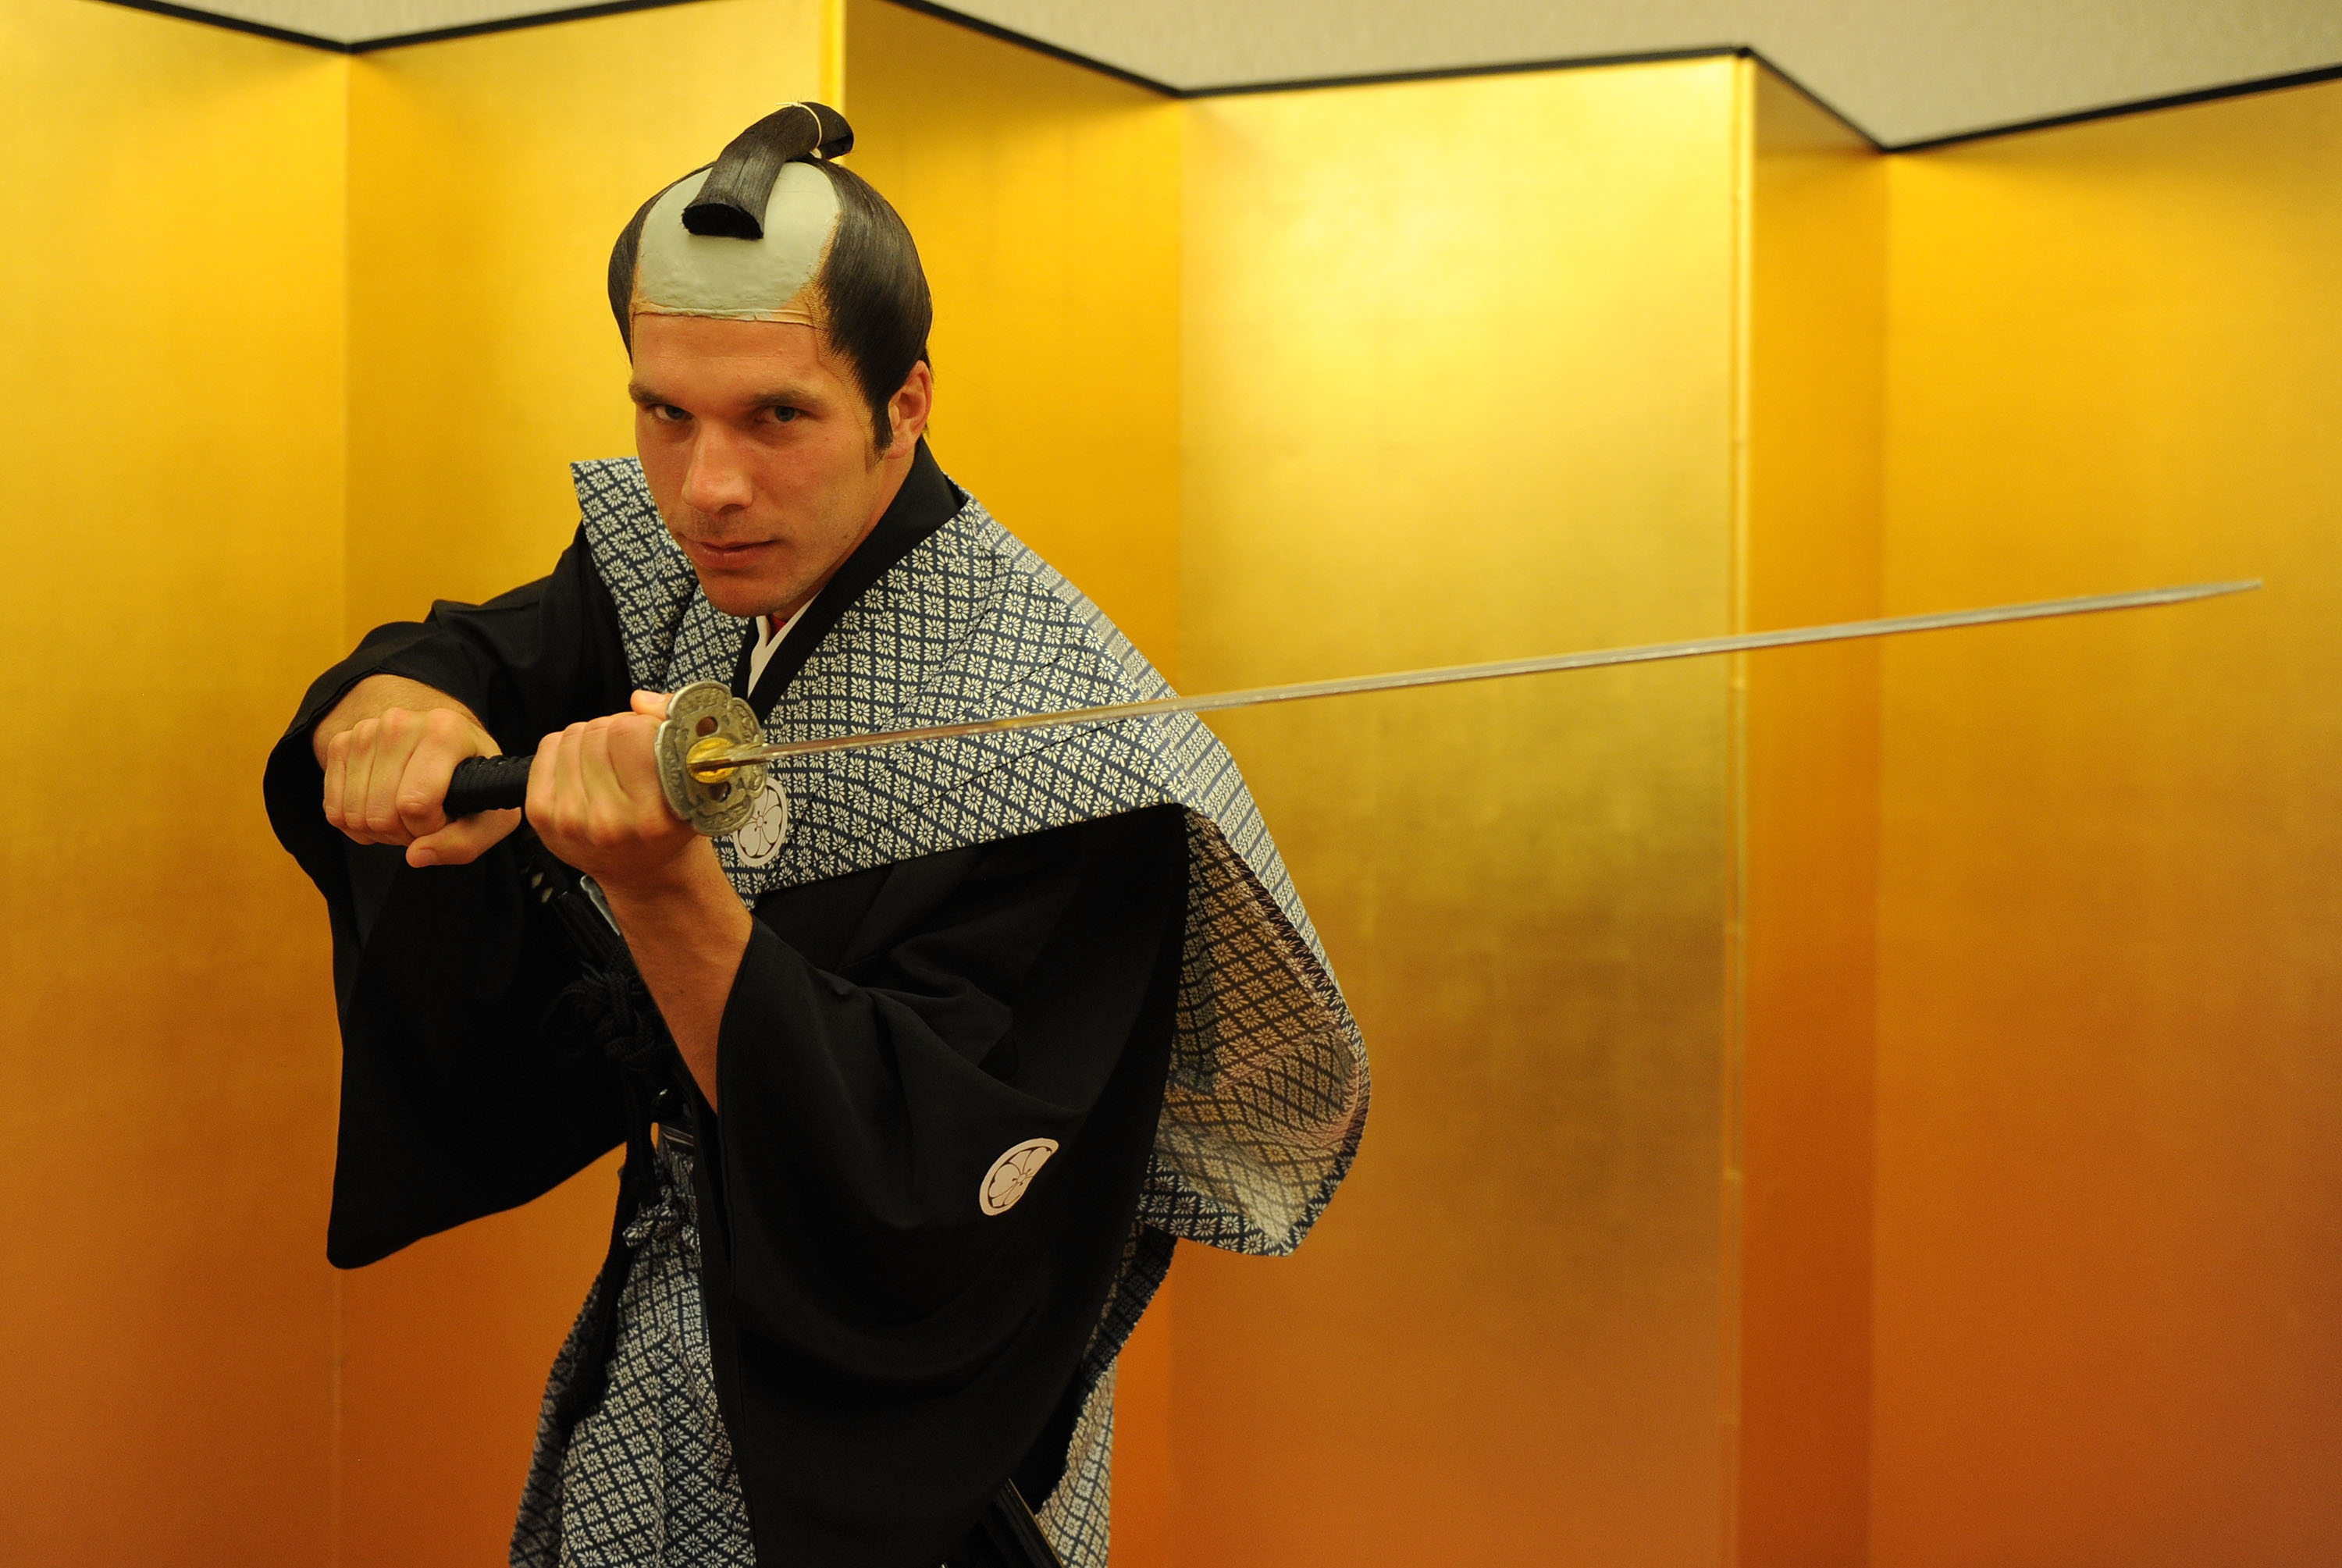 SAITAMA, JAPAN - JULY 25: (EXCLUSIVE COVERAGE) Lukas Podolski of Arsenal FC poses dressed as a Samurai Warrior in the Urawa Royal Pines Hotel in Japan for the club's pre-season Asian tour on July 25, 2013 in Saitama, Japan. (Photo by David Price/Arsenal FC via Getty Images)